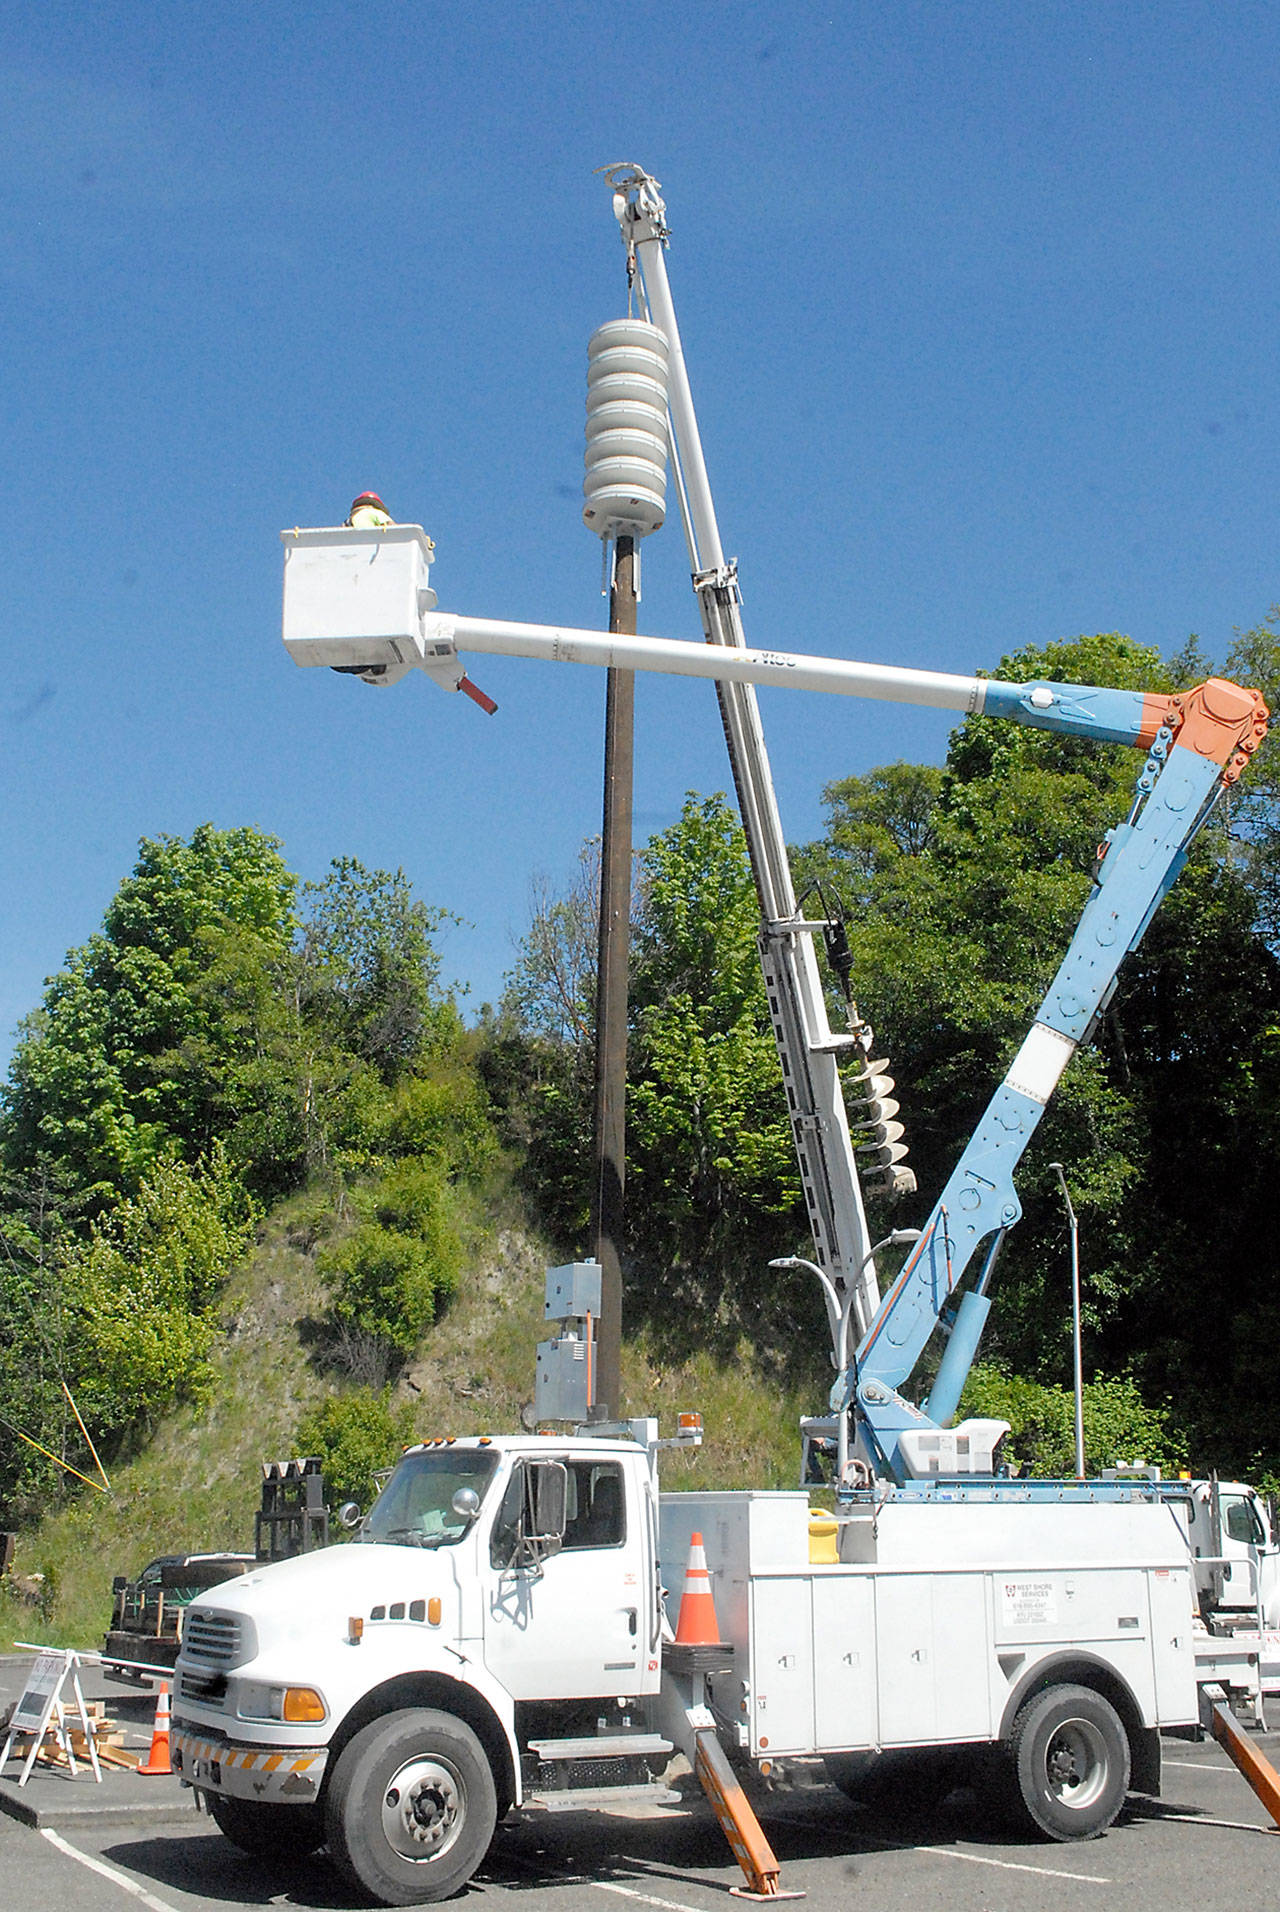 A crew hoists a new tsunami siren into place atop a pole located in the public parking lot at First and Lincoln streets in downtown Port Angeles. (Keith Thorpe/Peninsula Daily News)